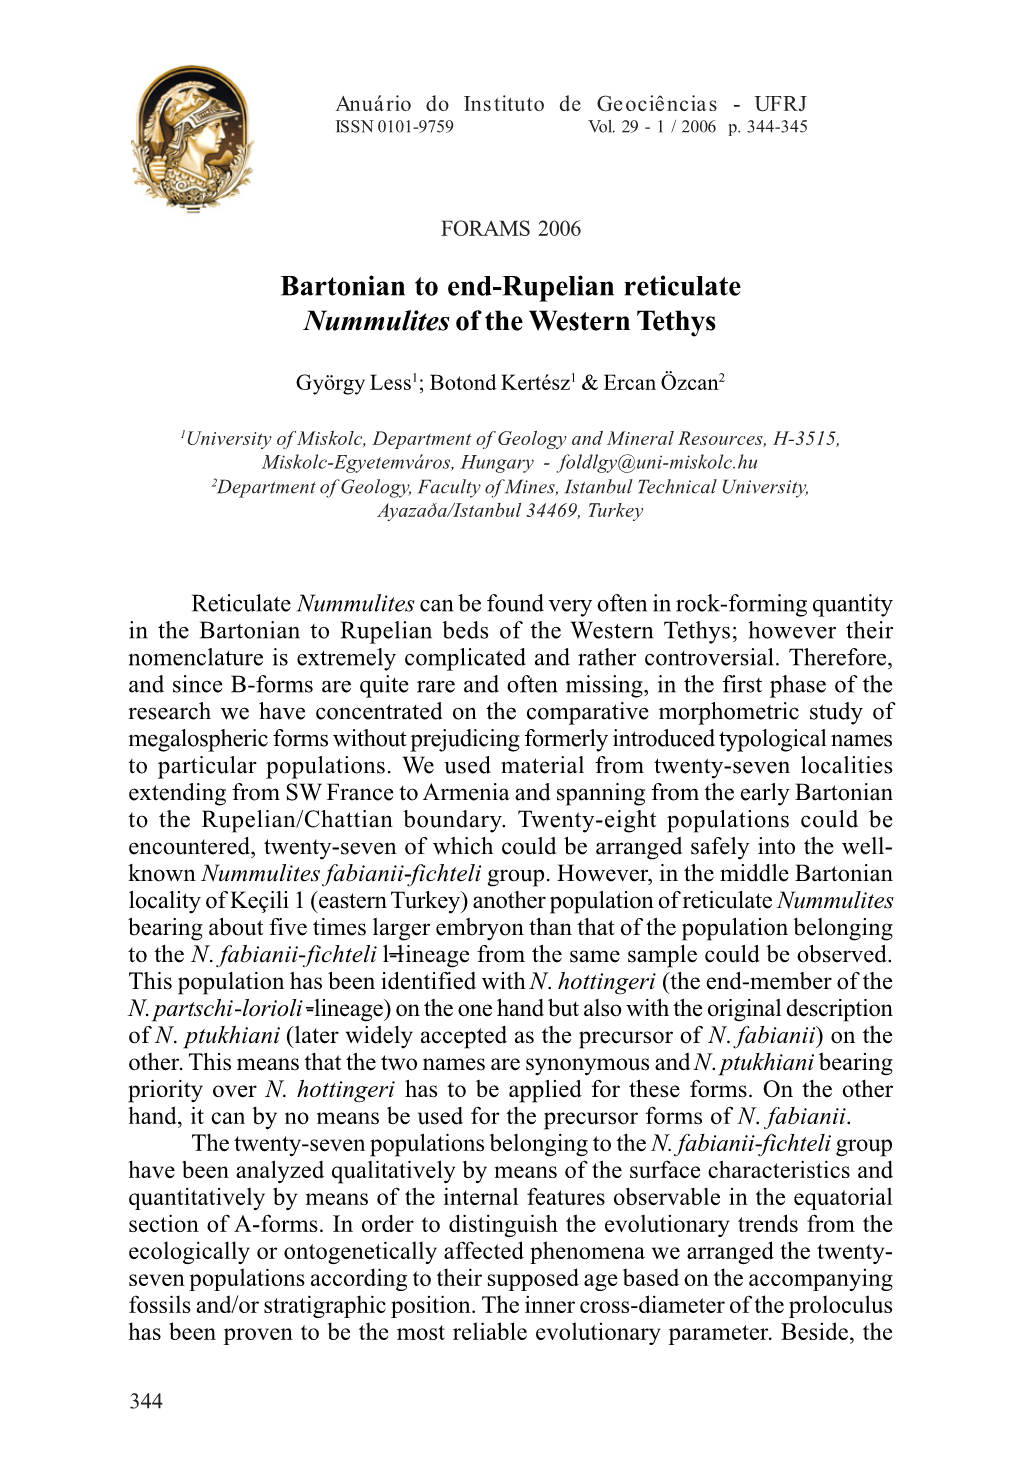 Bartonian to End-Rupelian Reticulate Nummulites of the Western Tethys